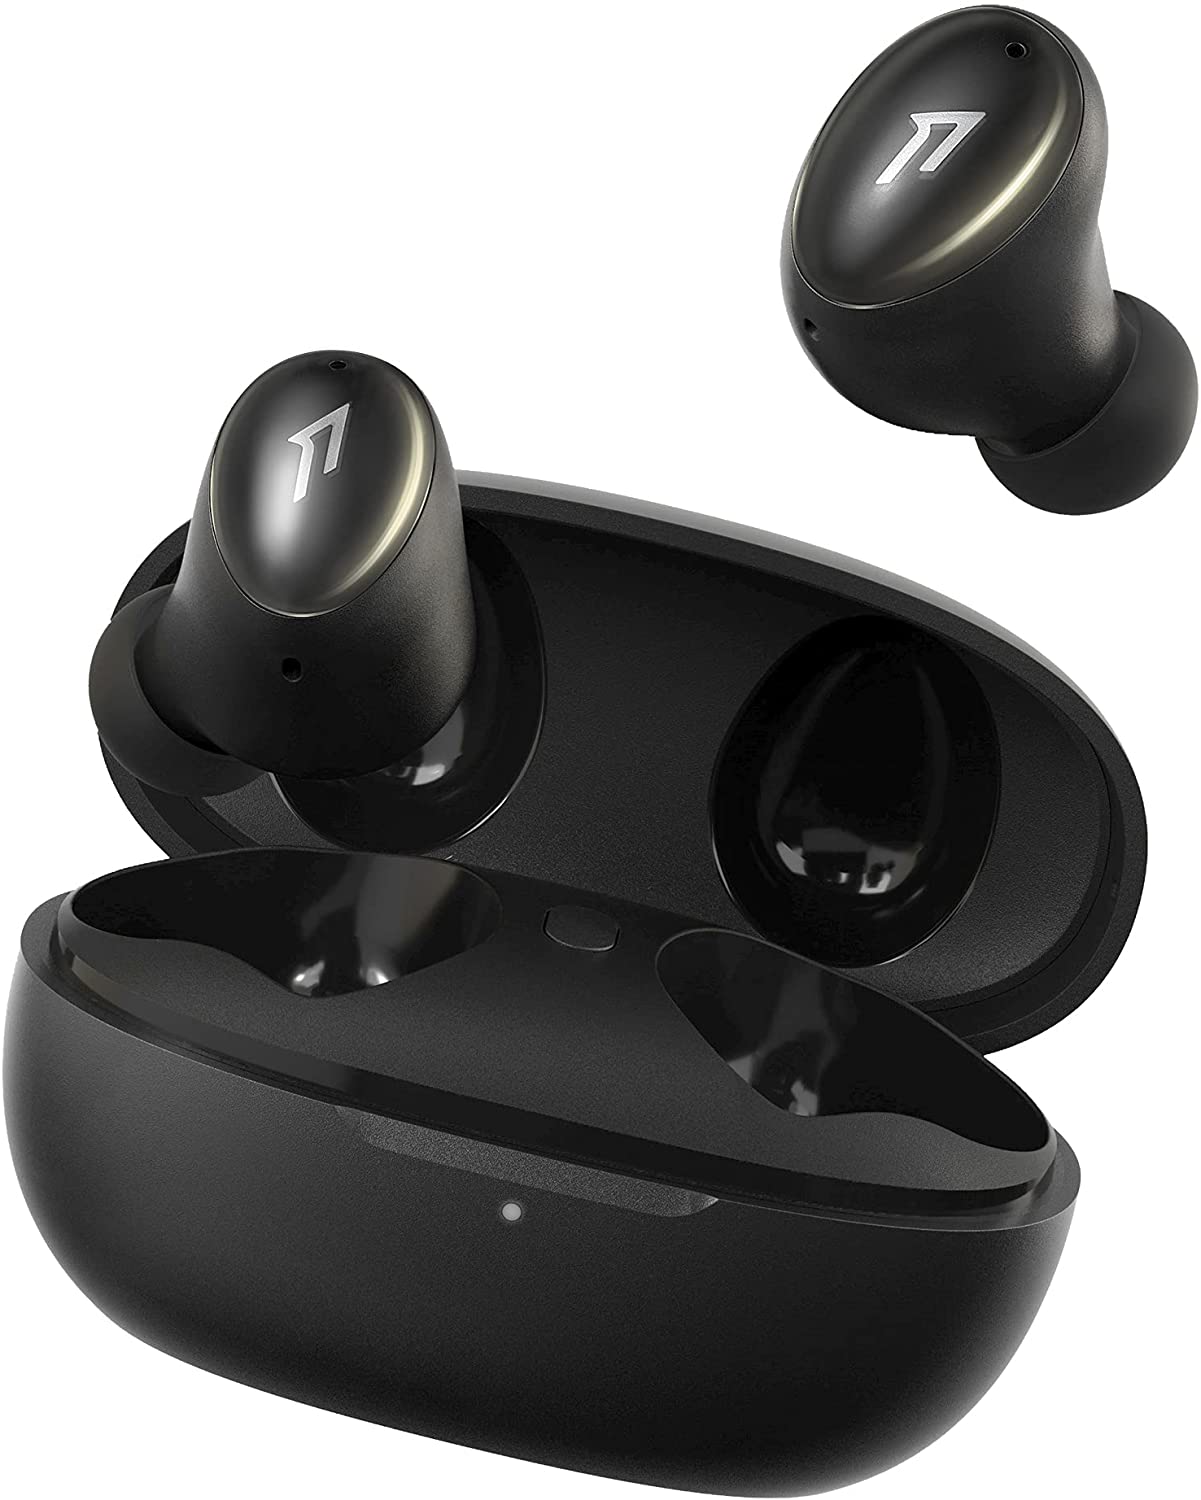 1MORE ColorBuds 2 Active Noise Cancelling Wireless Earbuds, Bluetooth 5.2 Headphones, Sound ID, Dual Mode Noise Cancelling, CVC 8.0 for Clear Calls, Fast & Wireless Charging, IPX5, ANC, Black